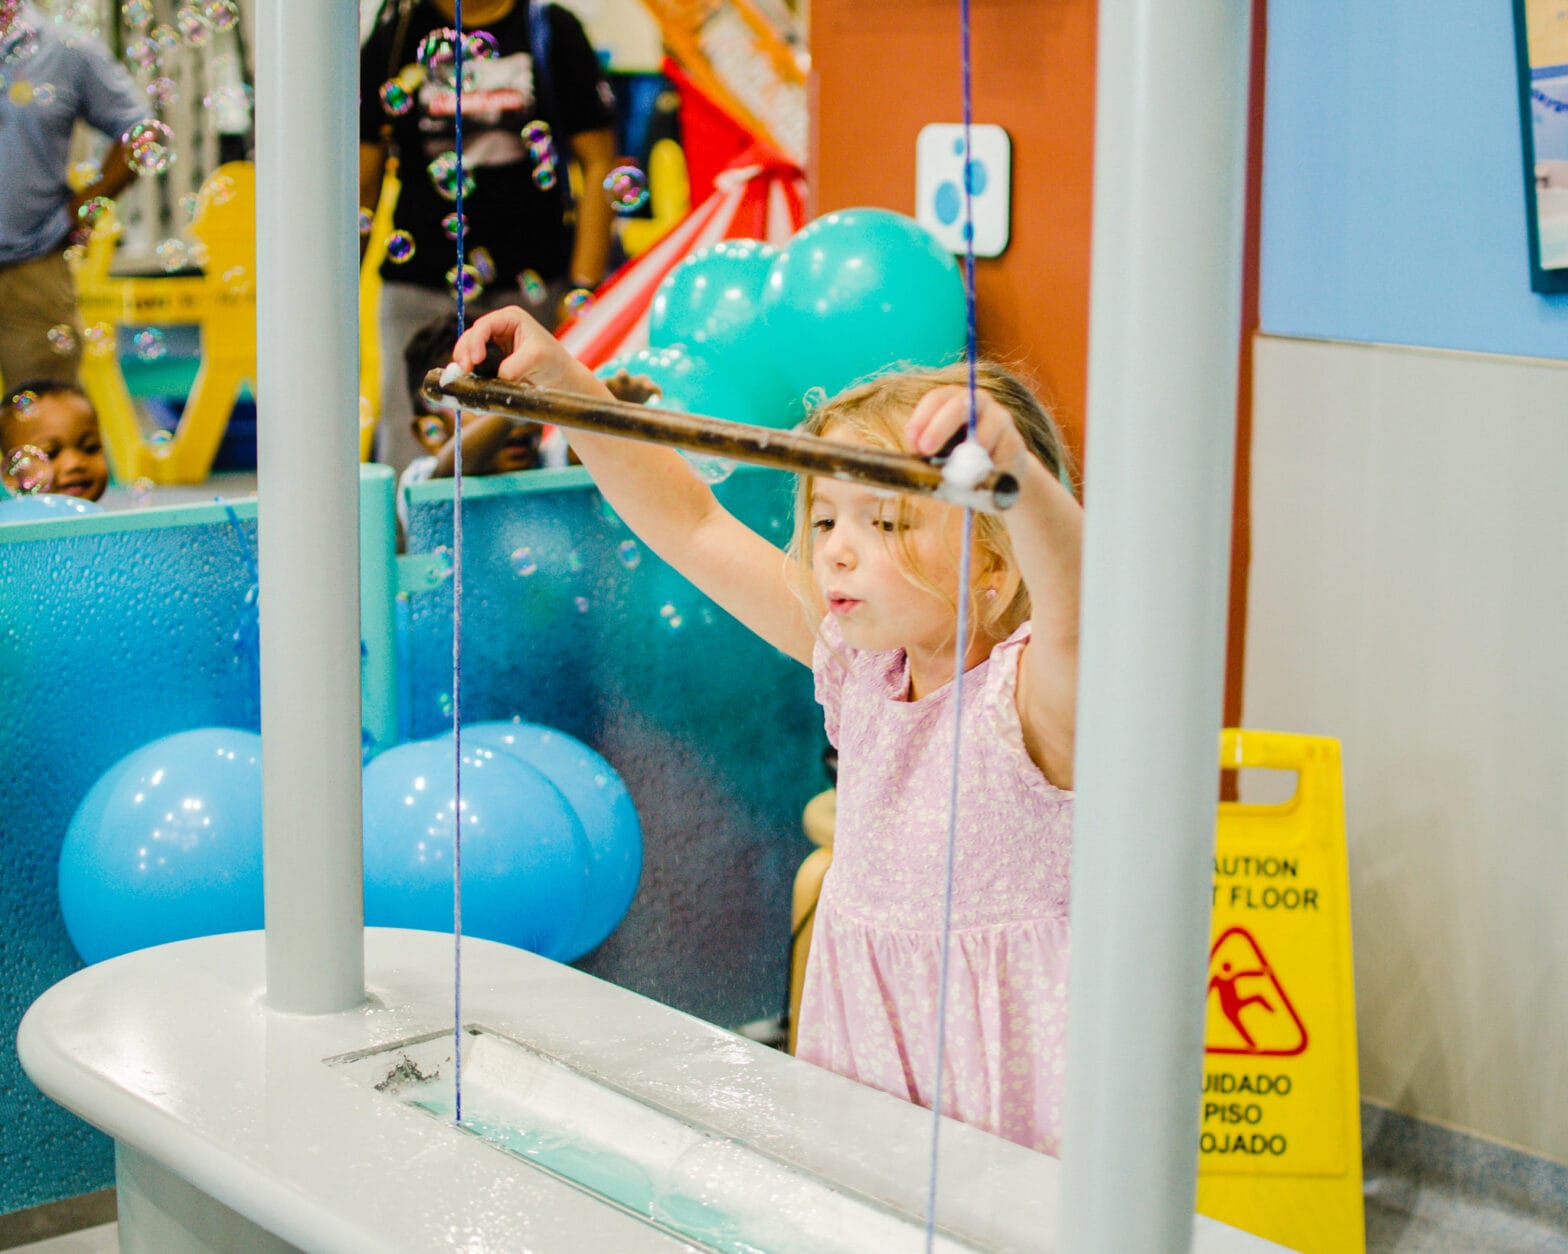 A little girl playing with the bubble machines